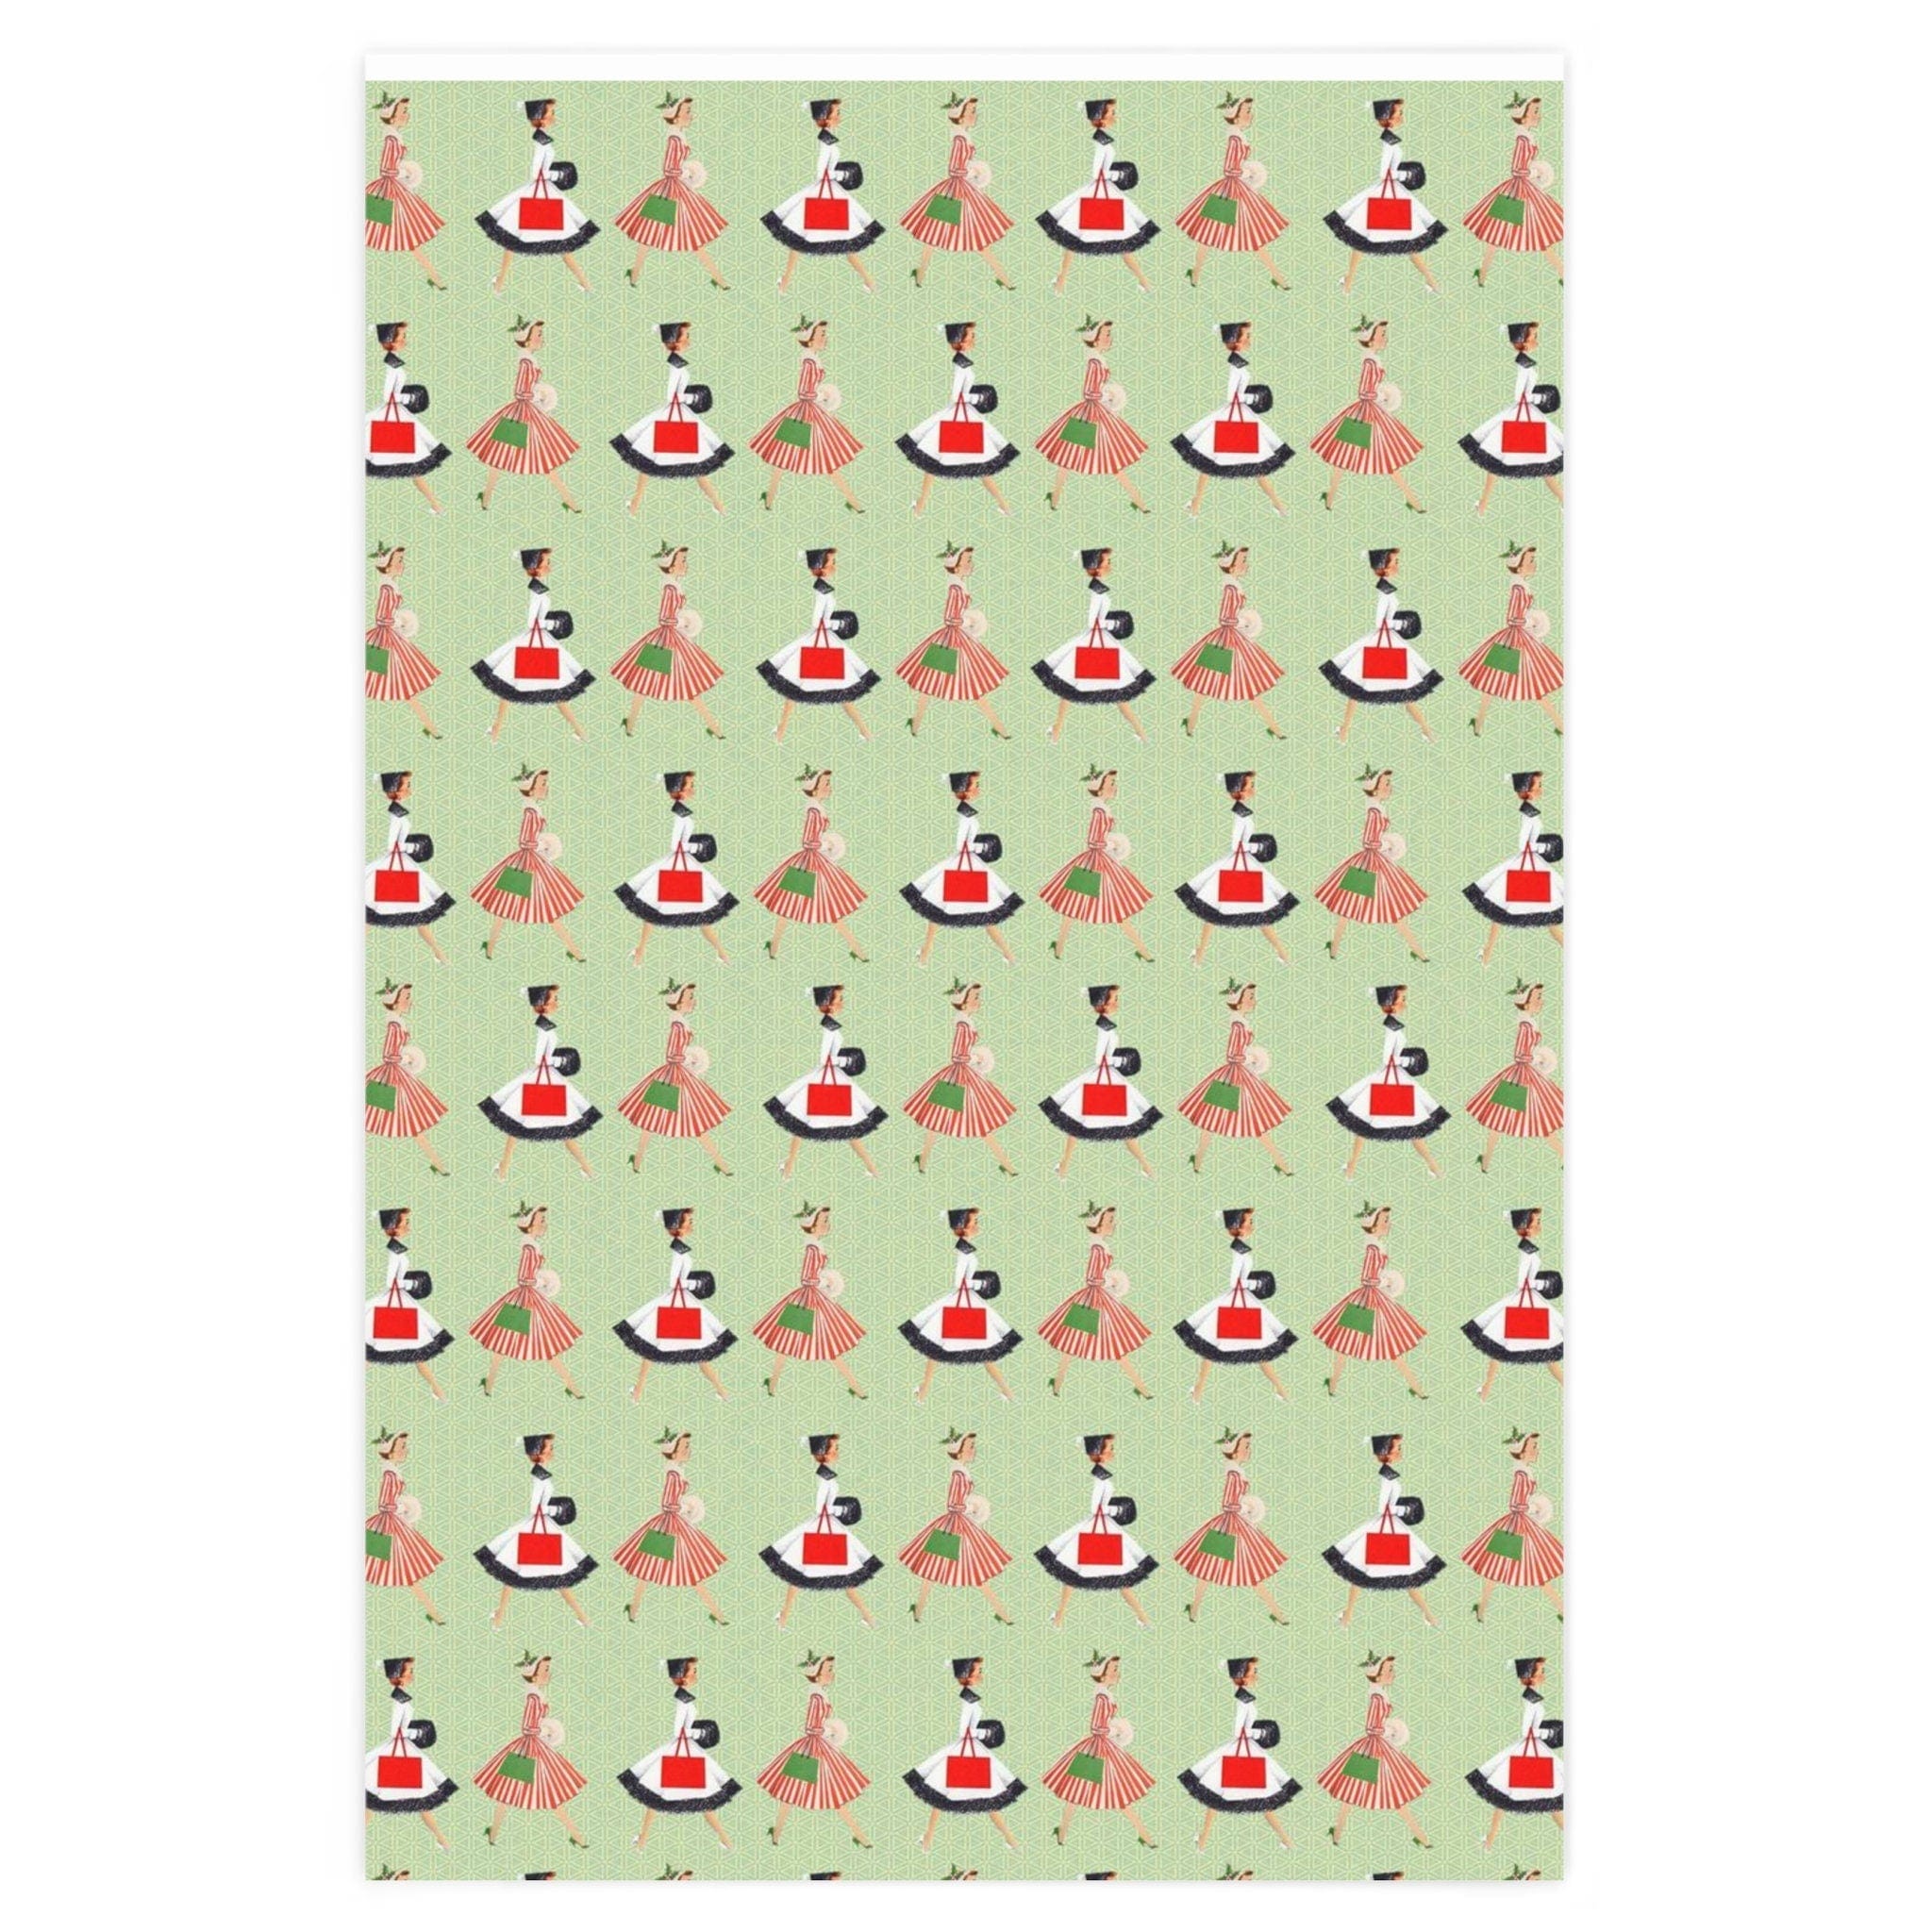 Kate McEnroe New York 50s Vintage Women in Christmas Setting Wrapping Paper, Mid Century Modern Retro Green, Red, Ladies, Housewives Holiday Gift Wrap - 130882623Wrapping Paper26518436537926371563